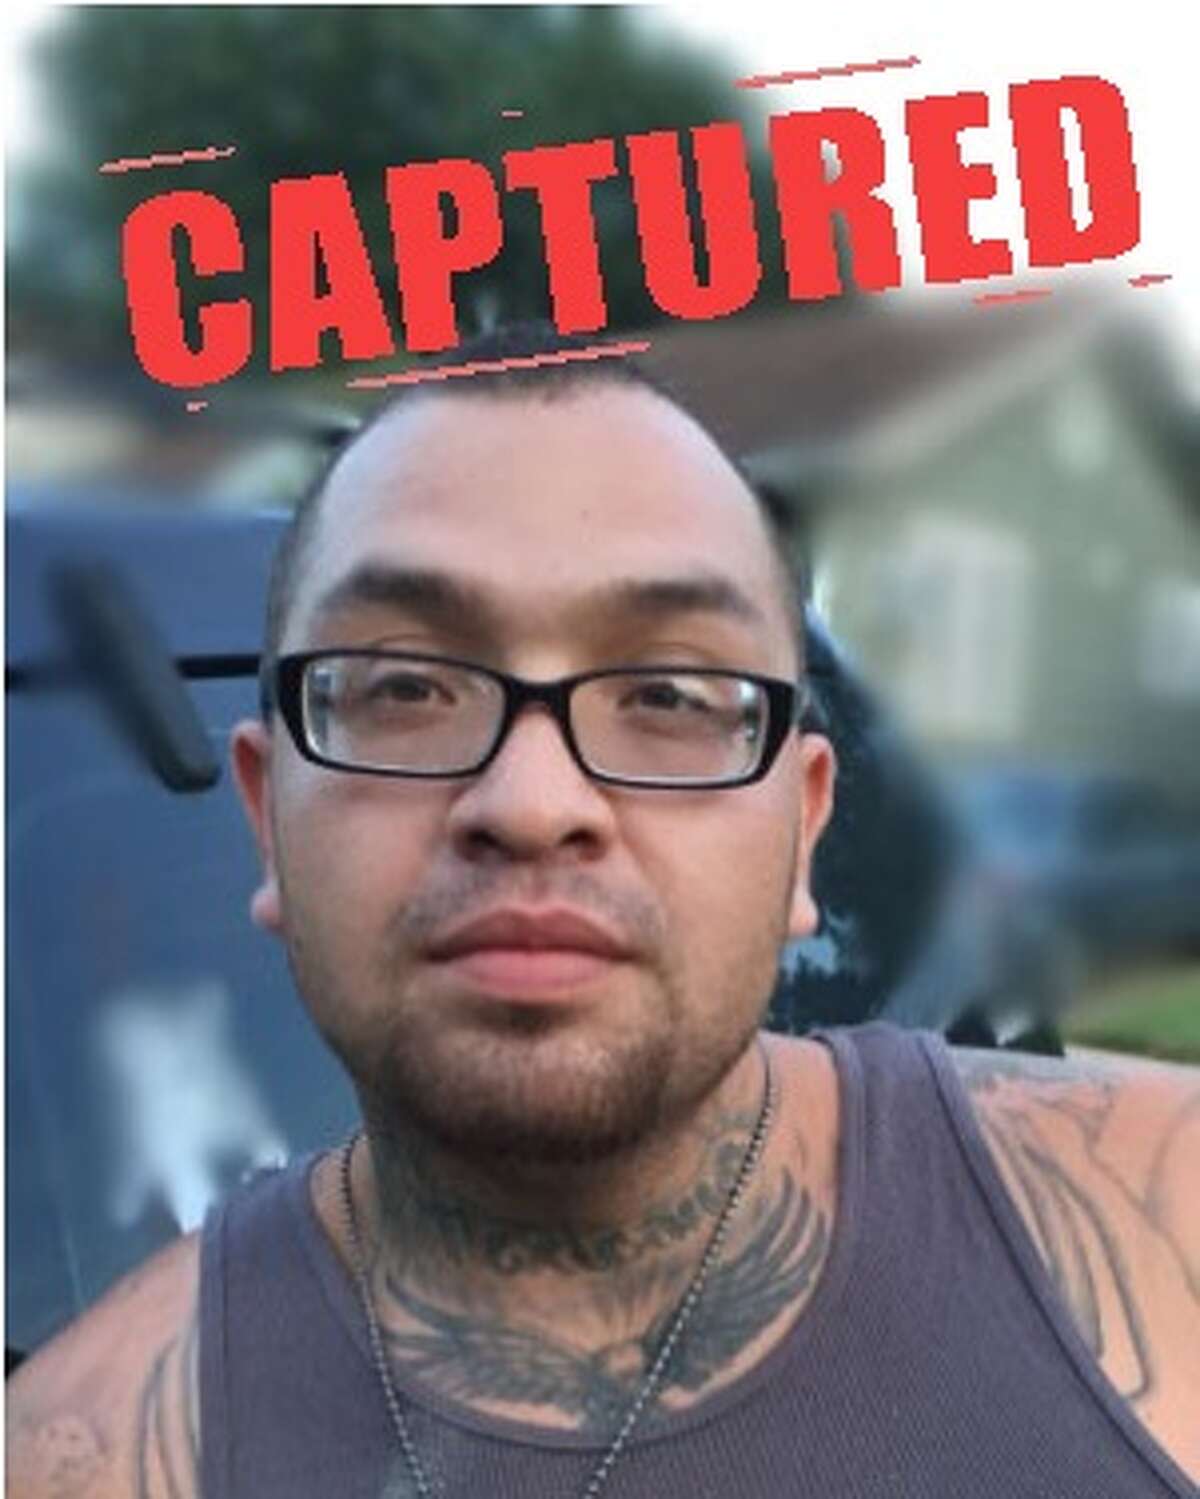 Latin Kings Gang Member Lands On The Texas 10 Most Wanted Fugitives